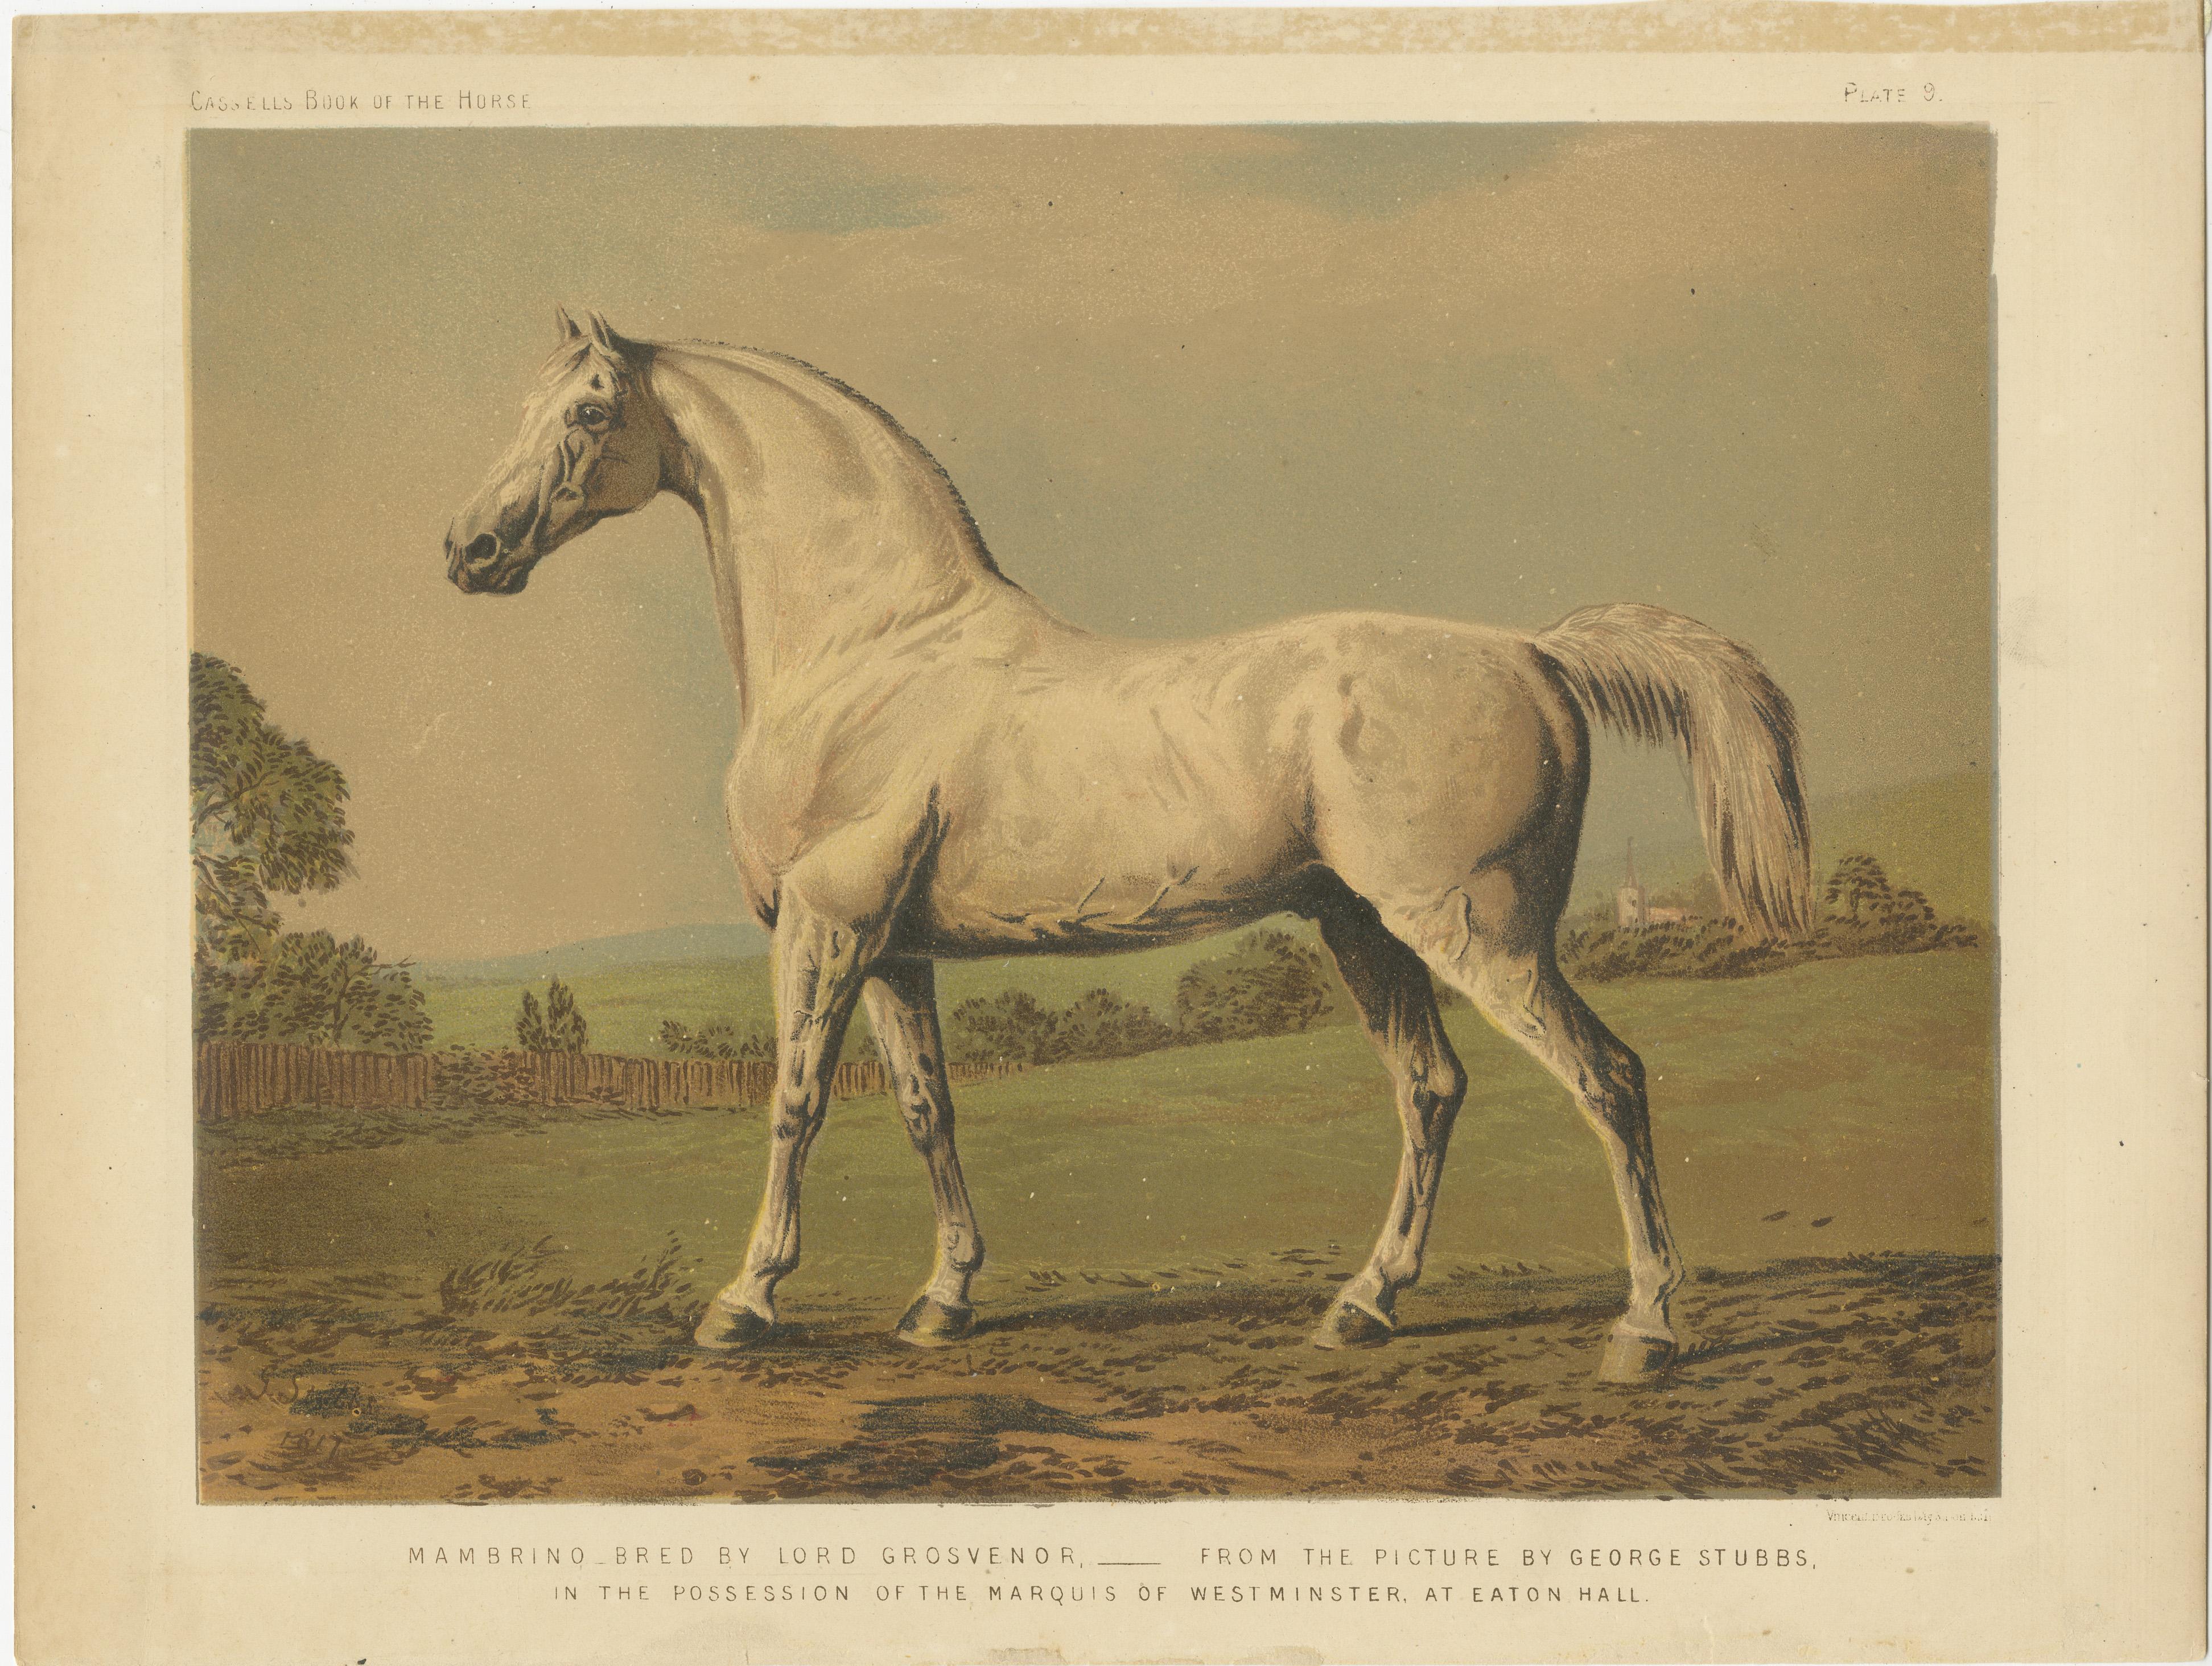 Antique print titled 'Mambrino bred by Lord Grosvenor'. Antique print of Mambrino, grey thoroughbred racehorse, foaled in 1768, bred by John Atkinson of Scholes at whose death became the property of Richard Grosvenor, 1st Earl Grosvenor. Retired to